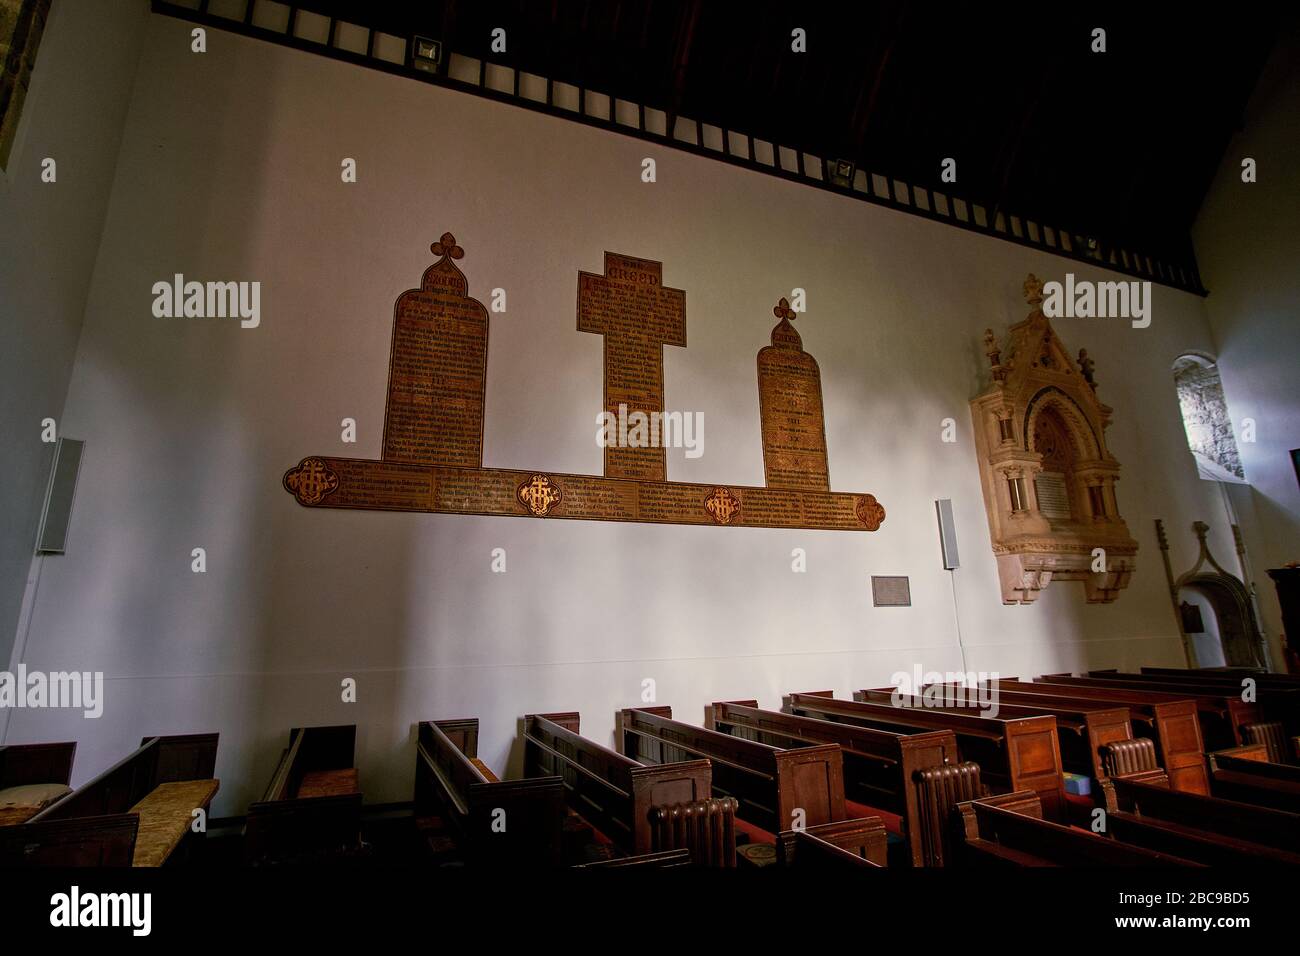 Gortaganniv, Gortaganniff, Co. Clare, Ireland - 10/26/2018: Old Augustinian Friary East of Adare, Ireland. Interior chowing creed mural. Stock Photo